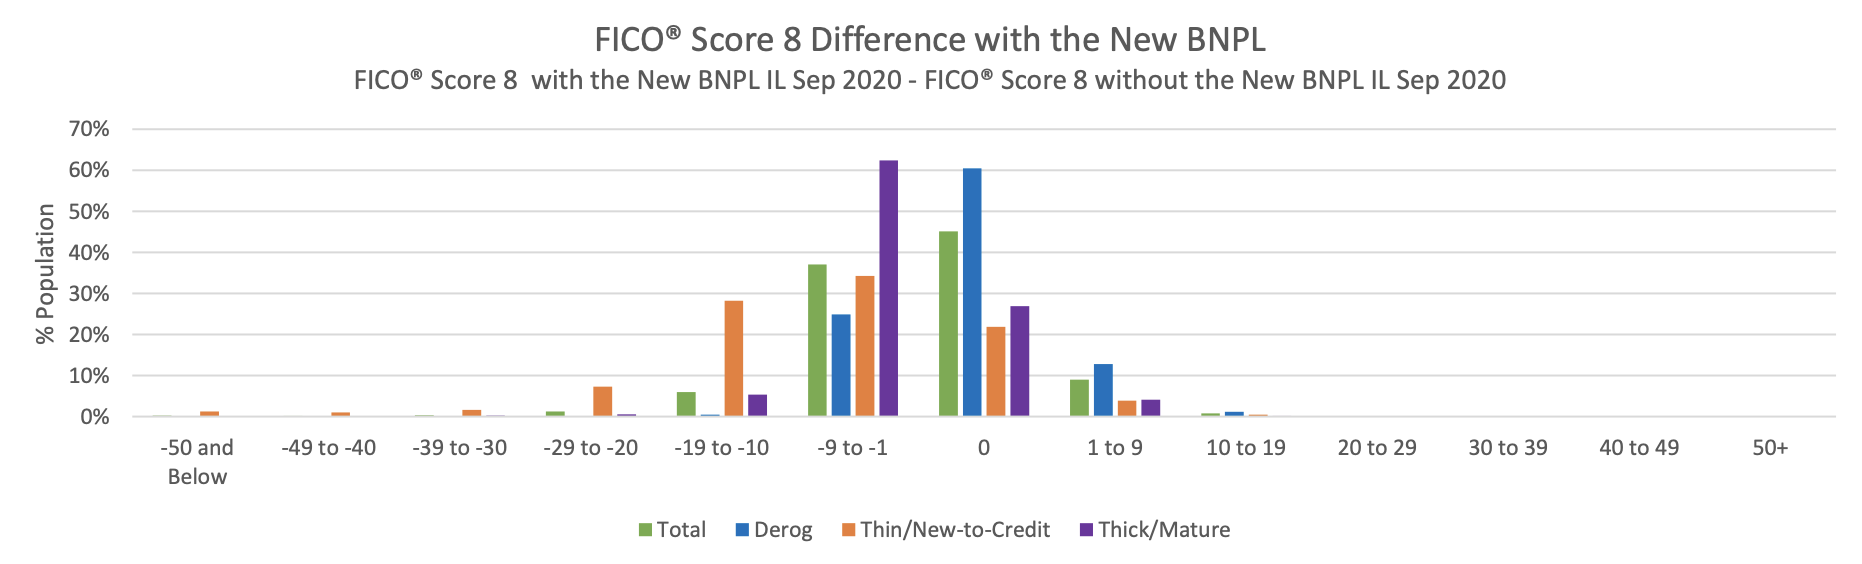 Majority of the Consumers Observe a Modest Score Change with the Inclusion of the Newly Opened BNPL Account Reported as Installment 